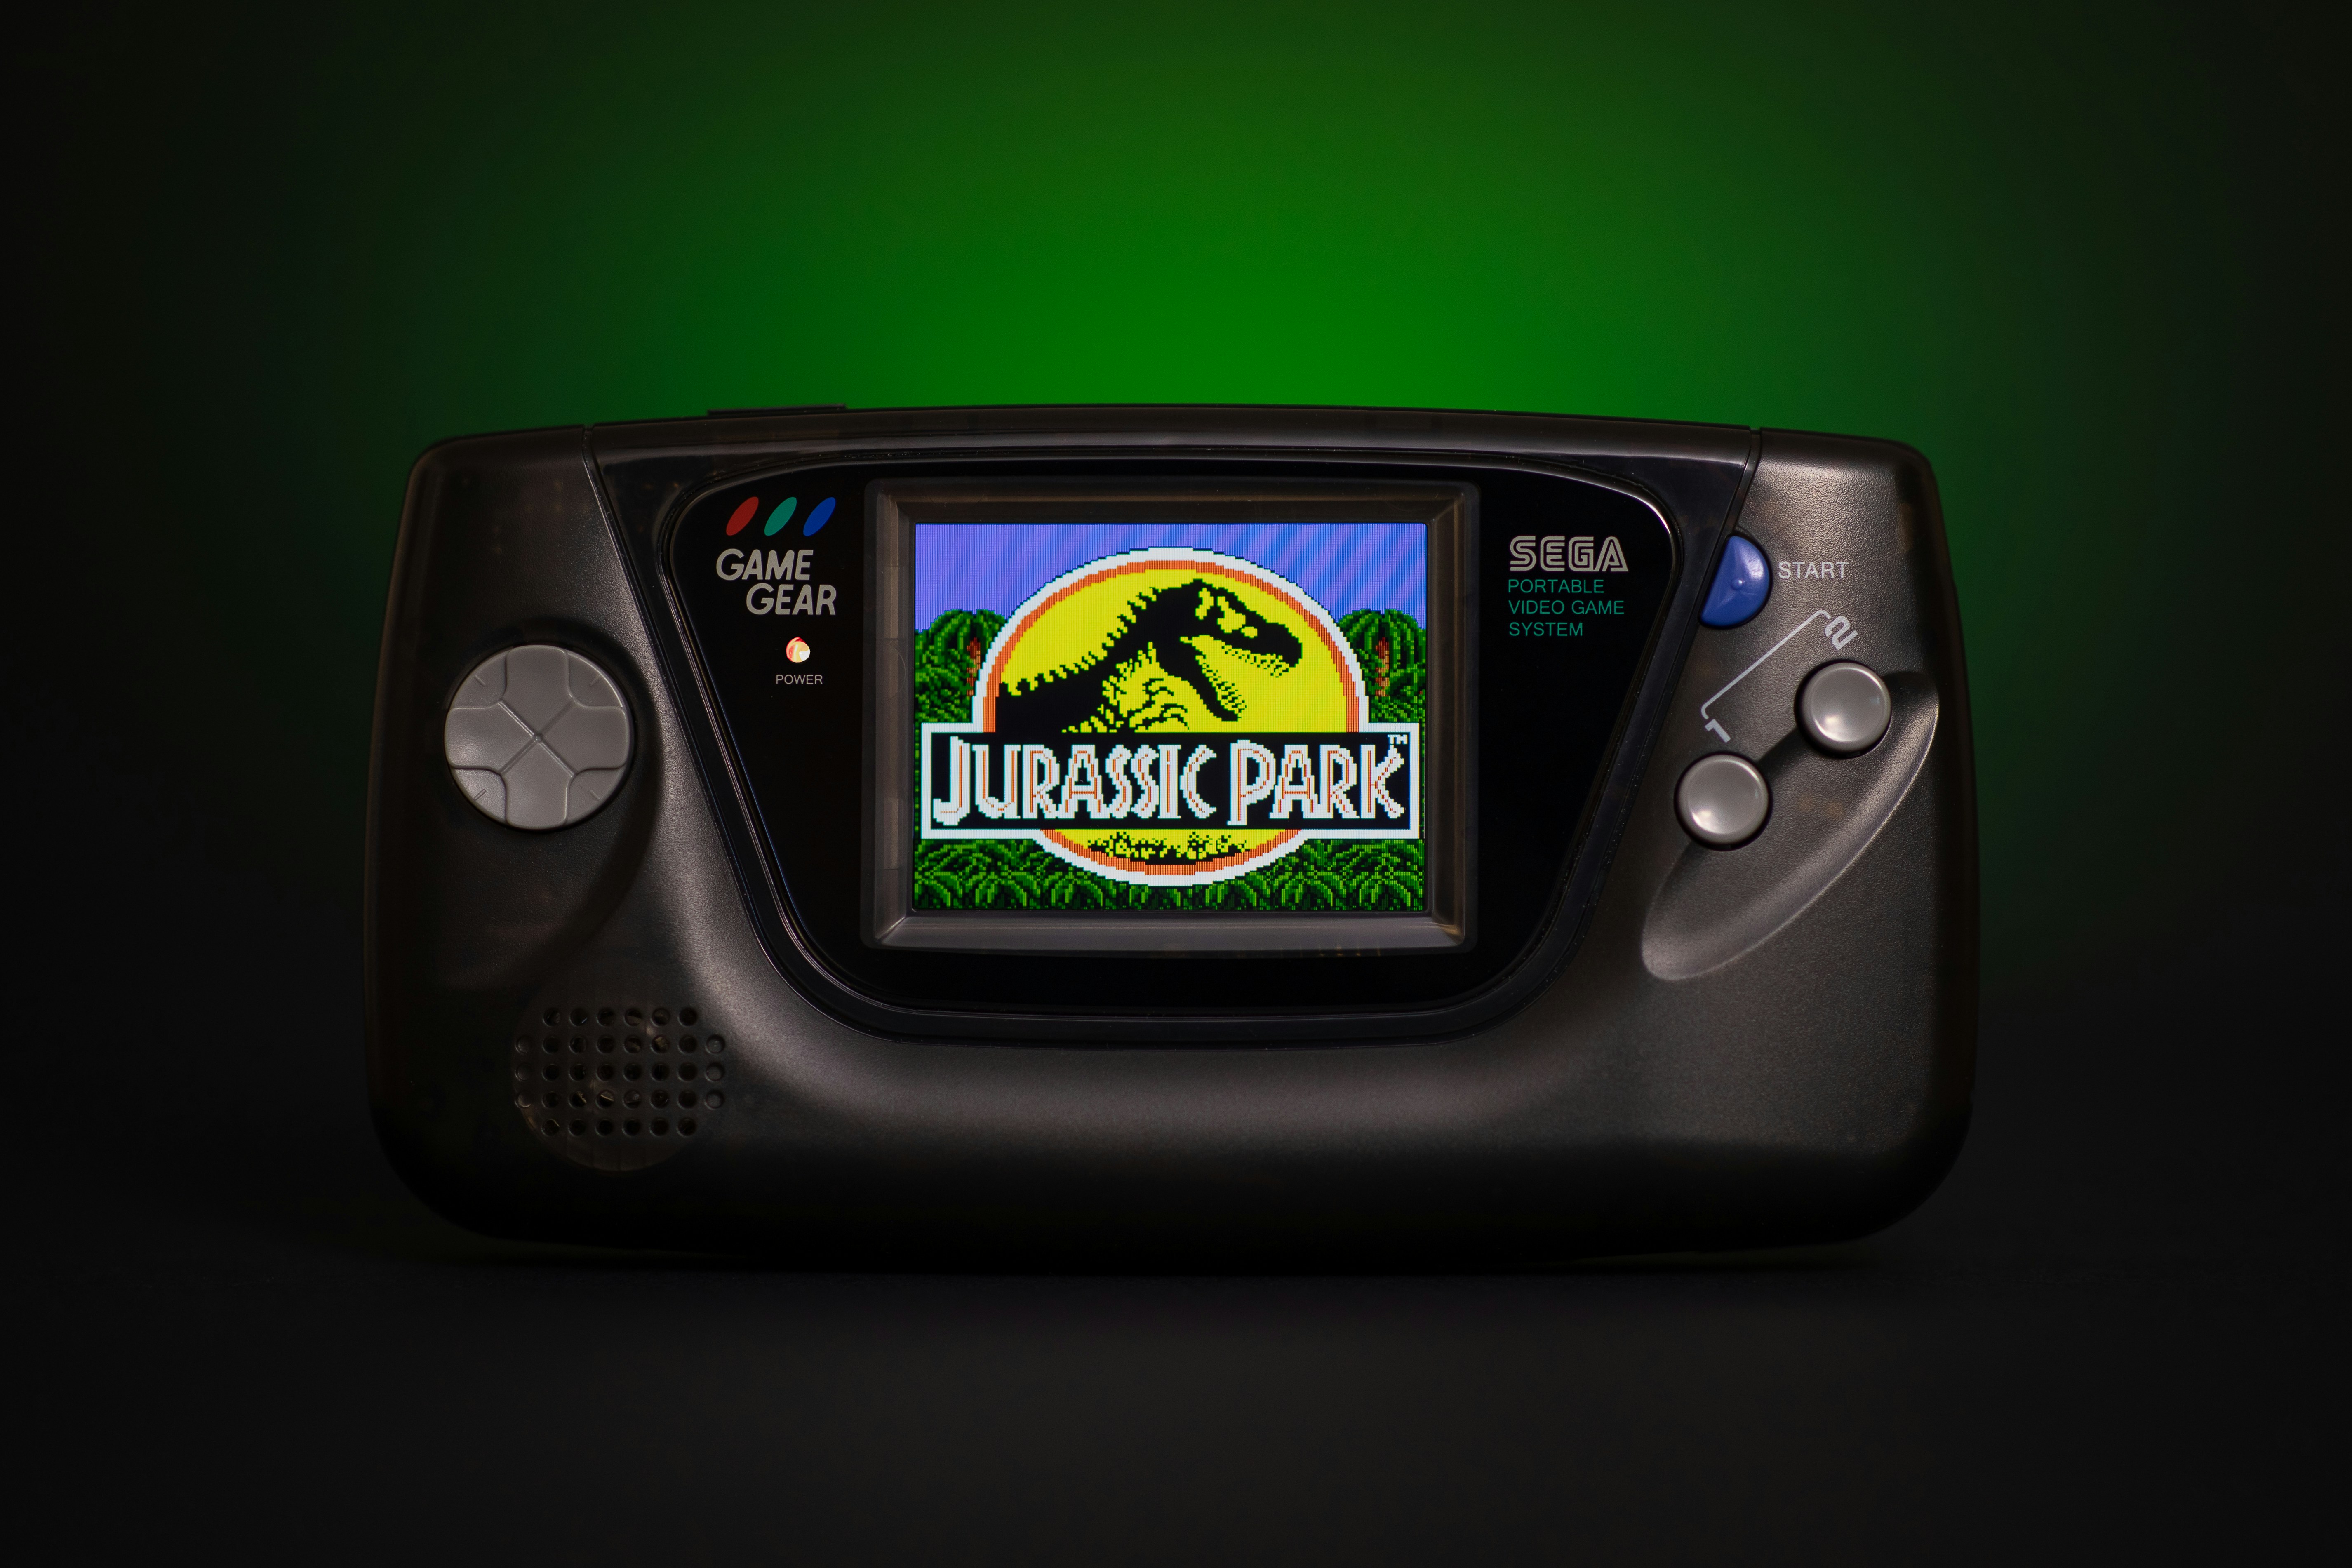 A retro Sega Game Gear with Jurassic Park game running, black background with a green glow. Semi transparent black shell and McWill LCD display screen upgrade.